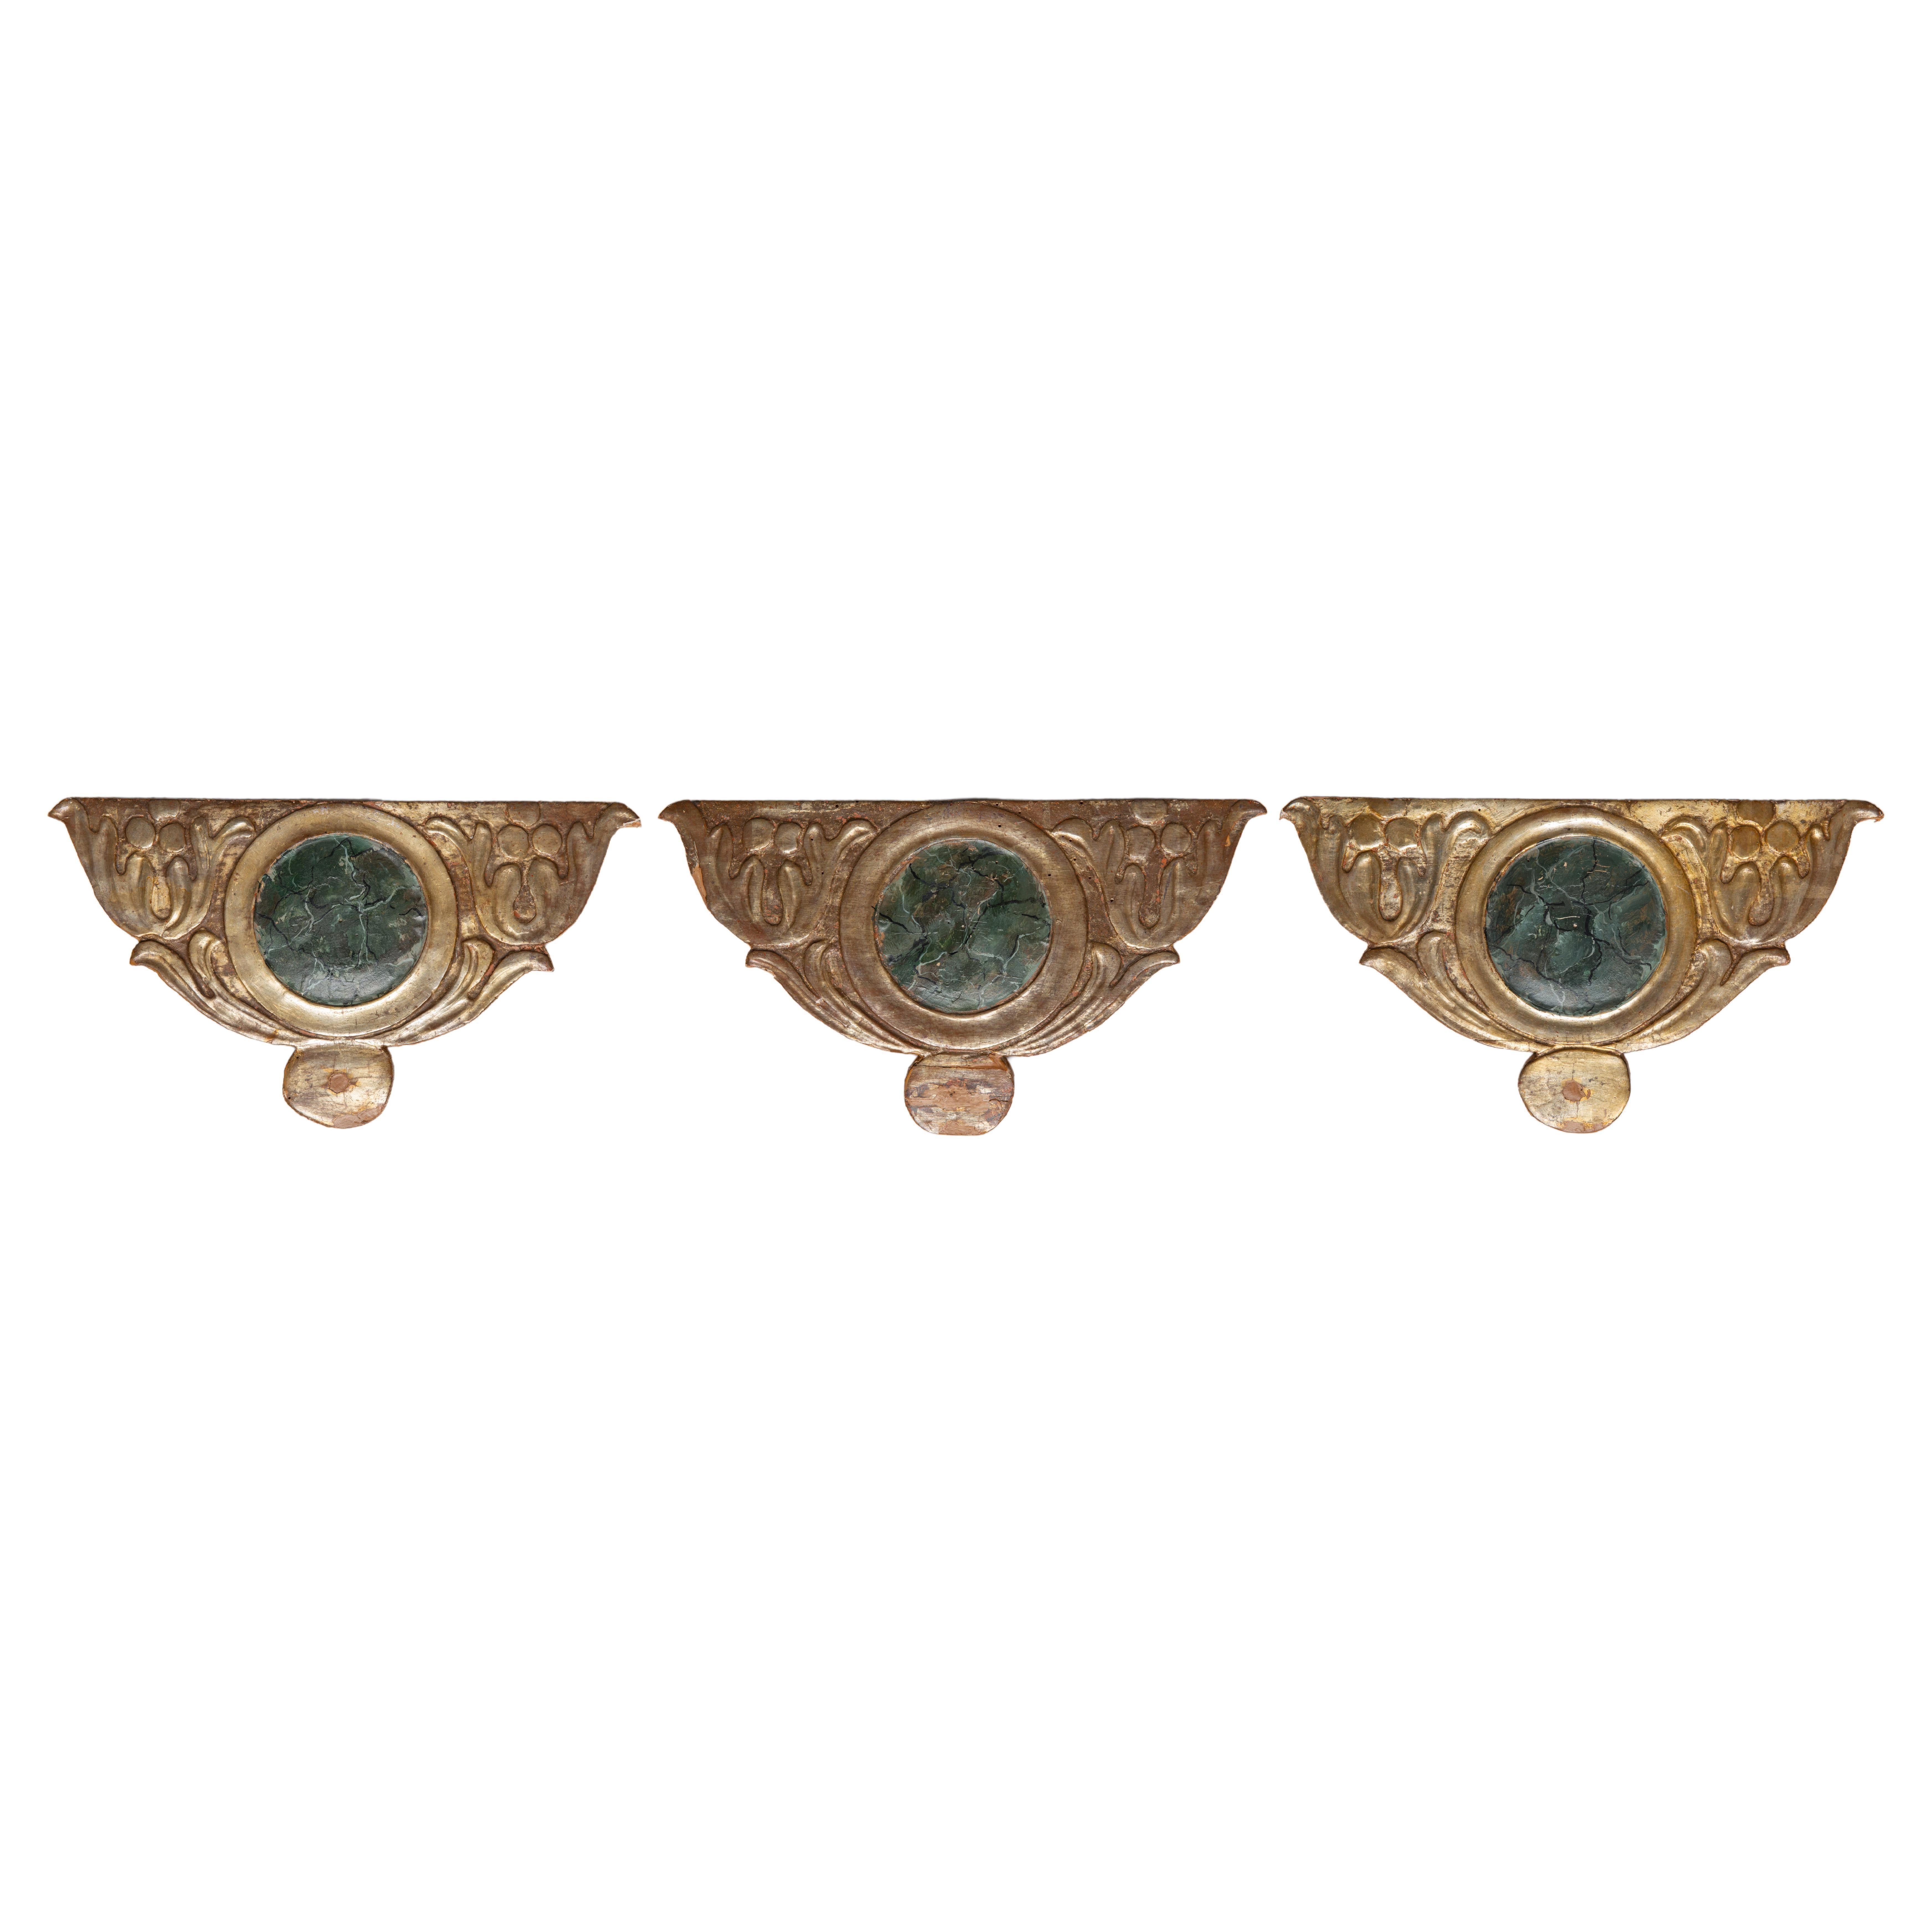 O/4738 - An idea for these three gilt and lacquered friezes , for wall light sconces: on the wall, hanging above three parchment fans that hide the electrical connections.  The parchment fan photographed is only for example.